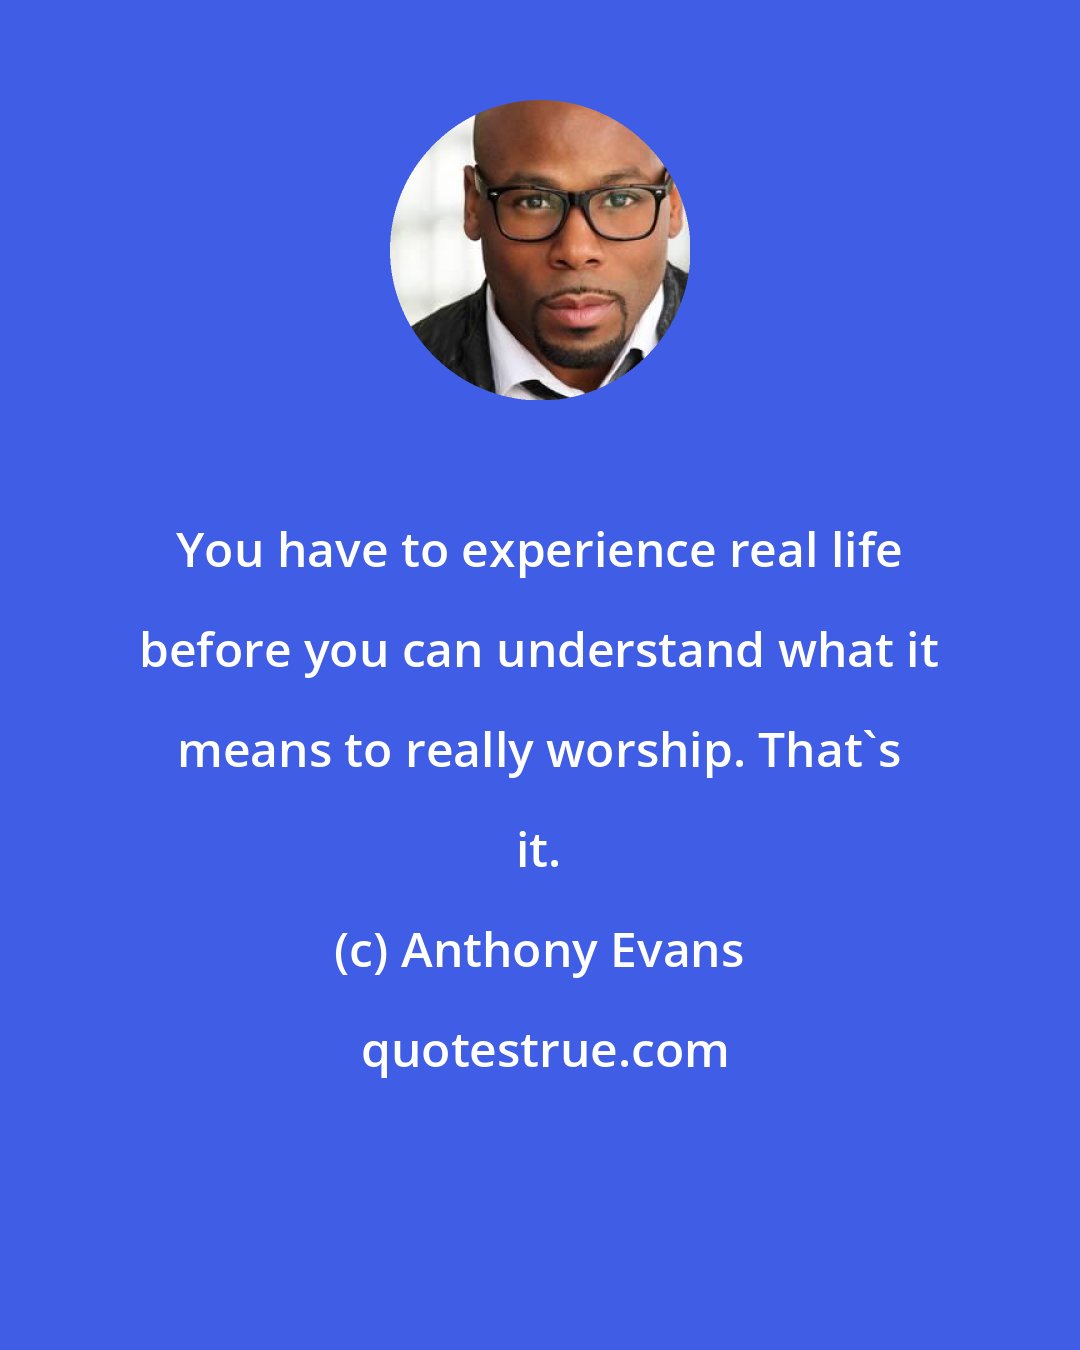 Anthony Evans: You have to experience real life before you can understand what it means to really worship. That's it.